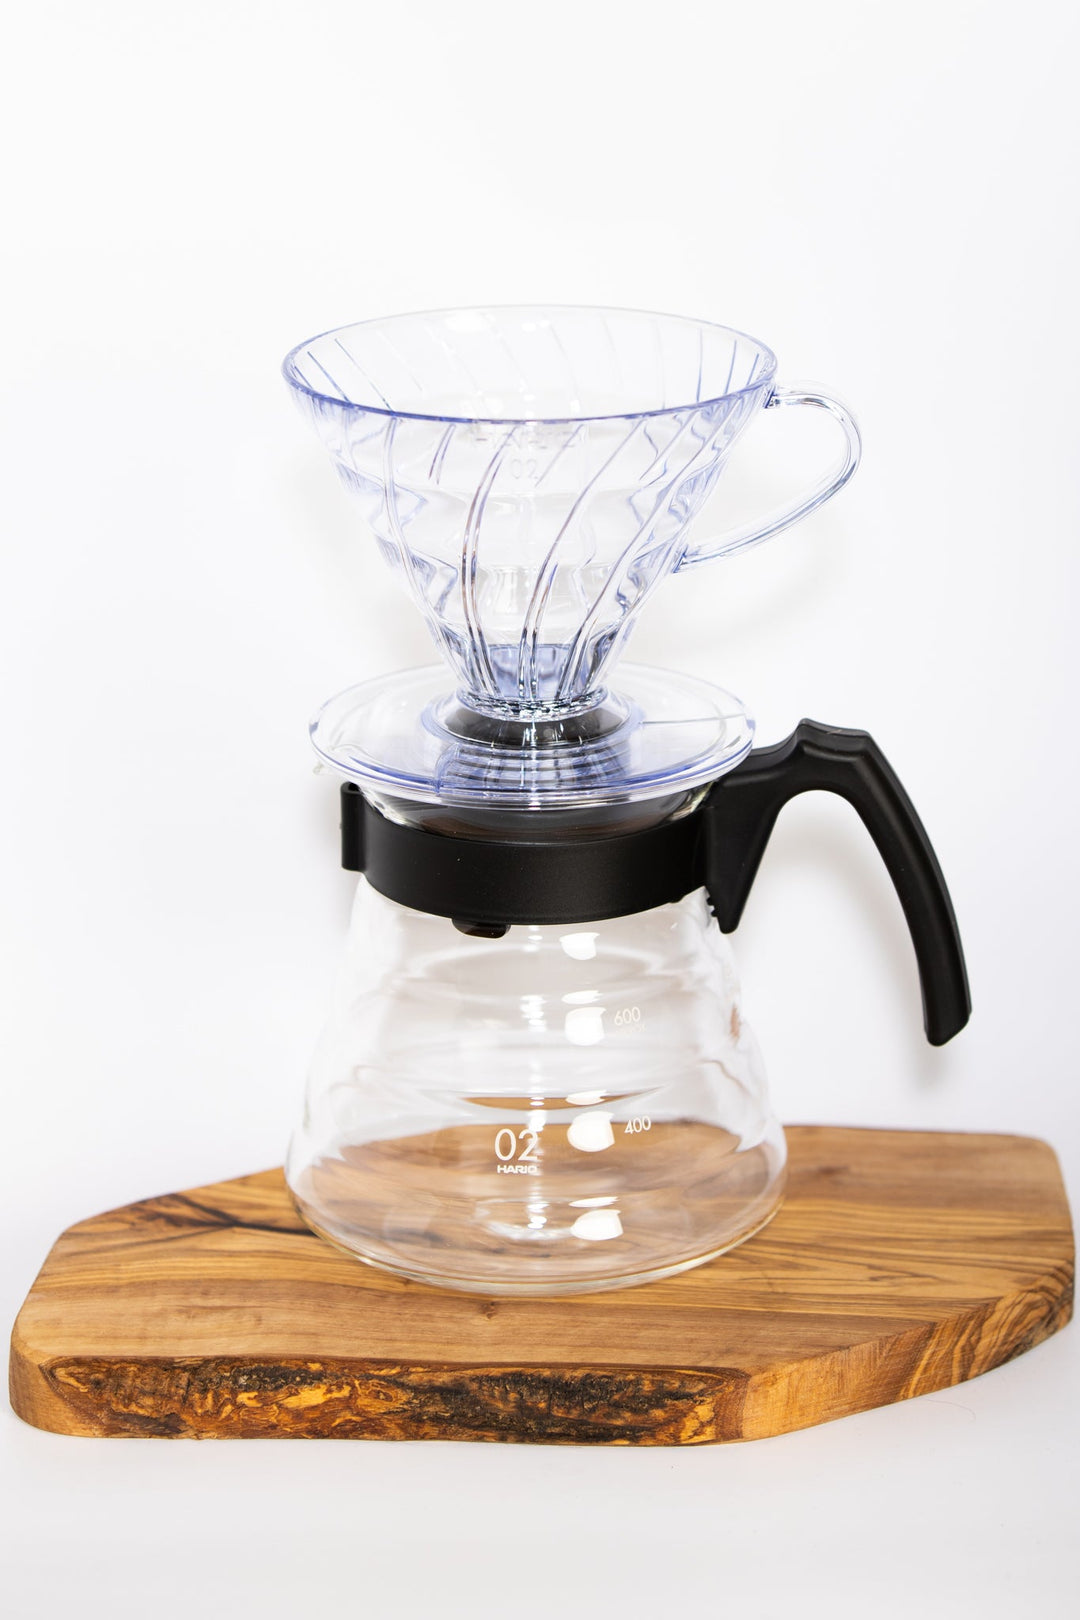 1pc Pour Over Coffee Maker Set, V60 1-2 Cup Non-Electric Pour Over